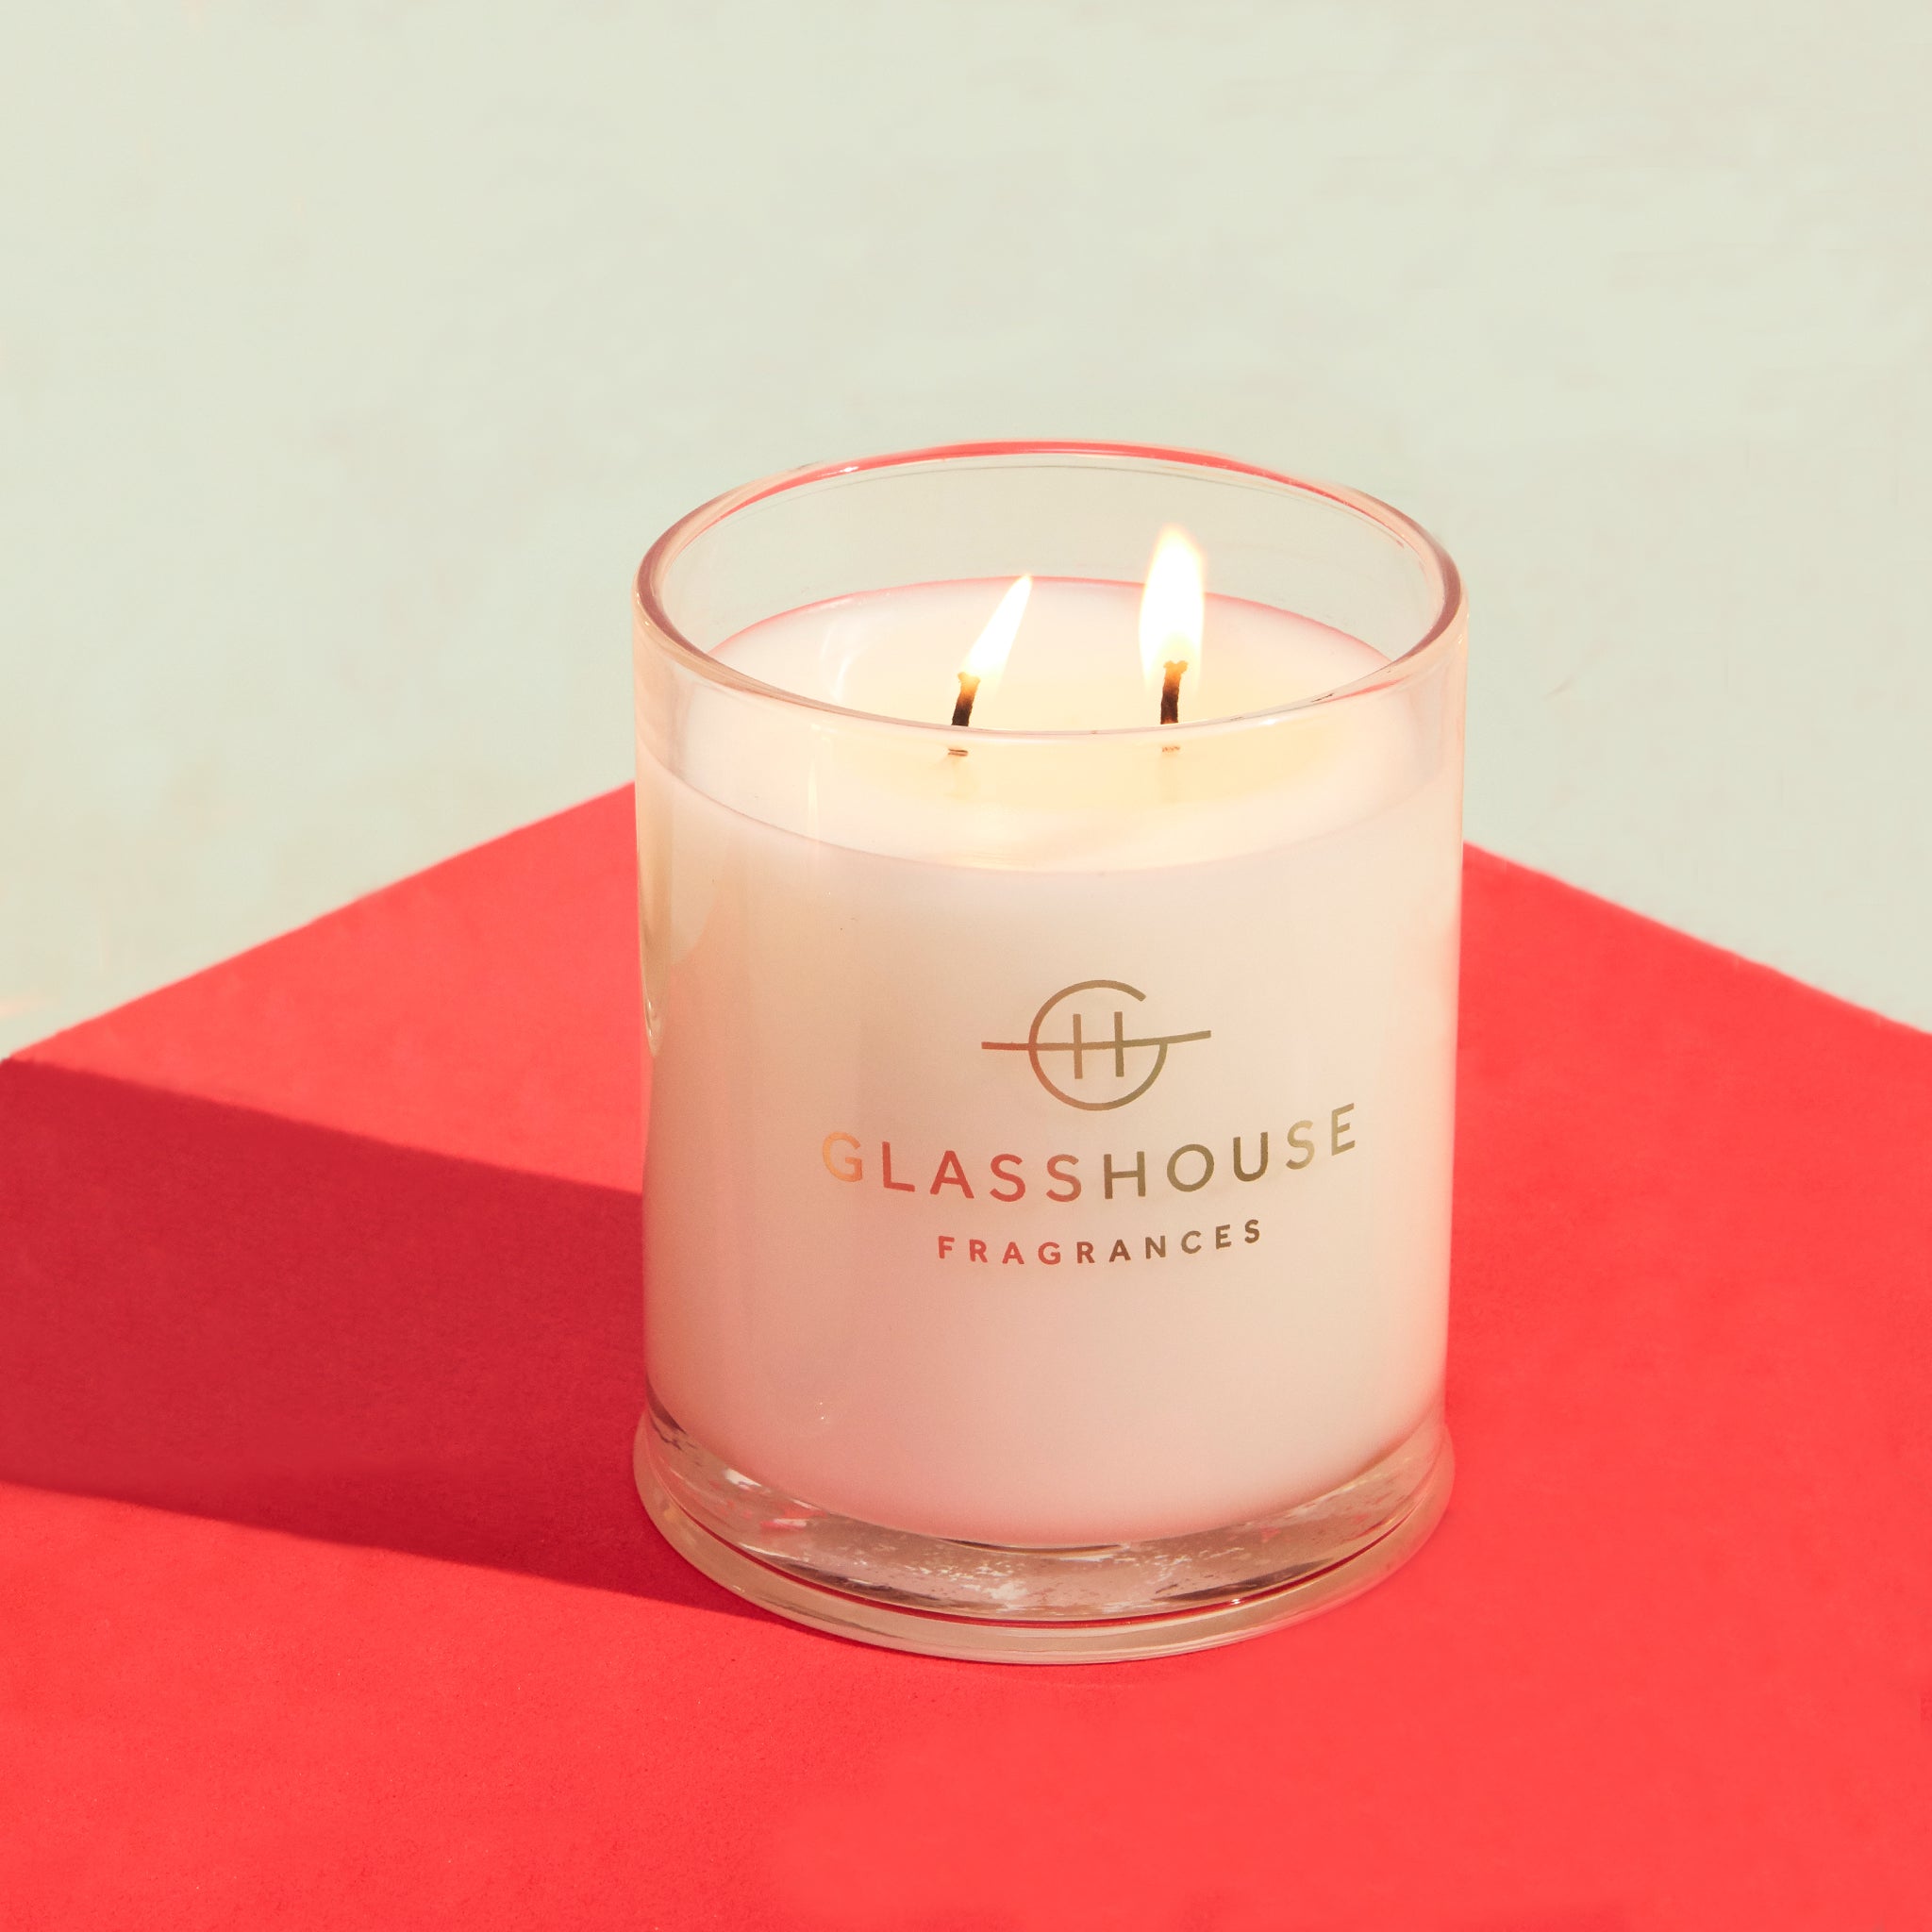 Glasshouse Fragrances Soy Candle burning on red tabletop